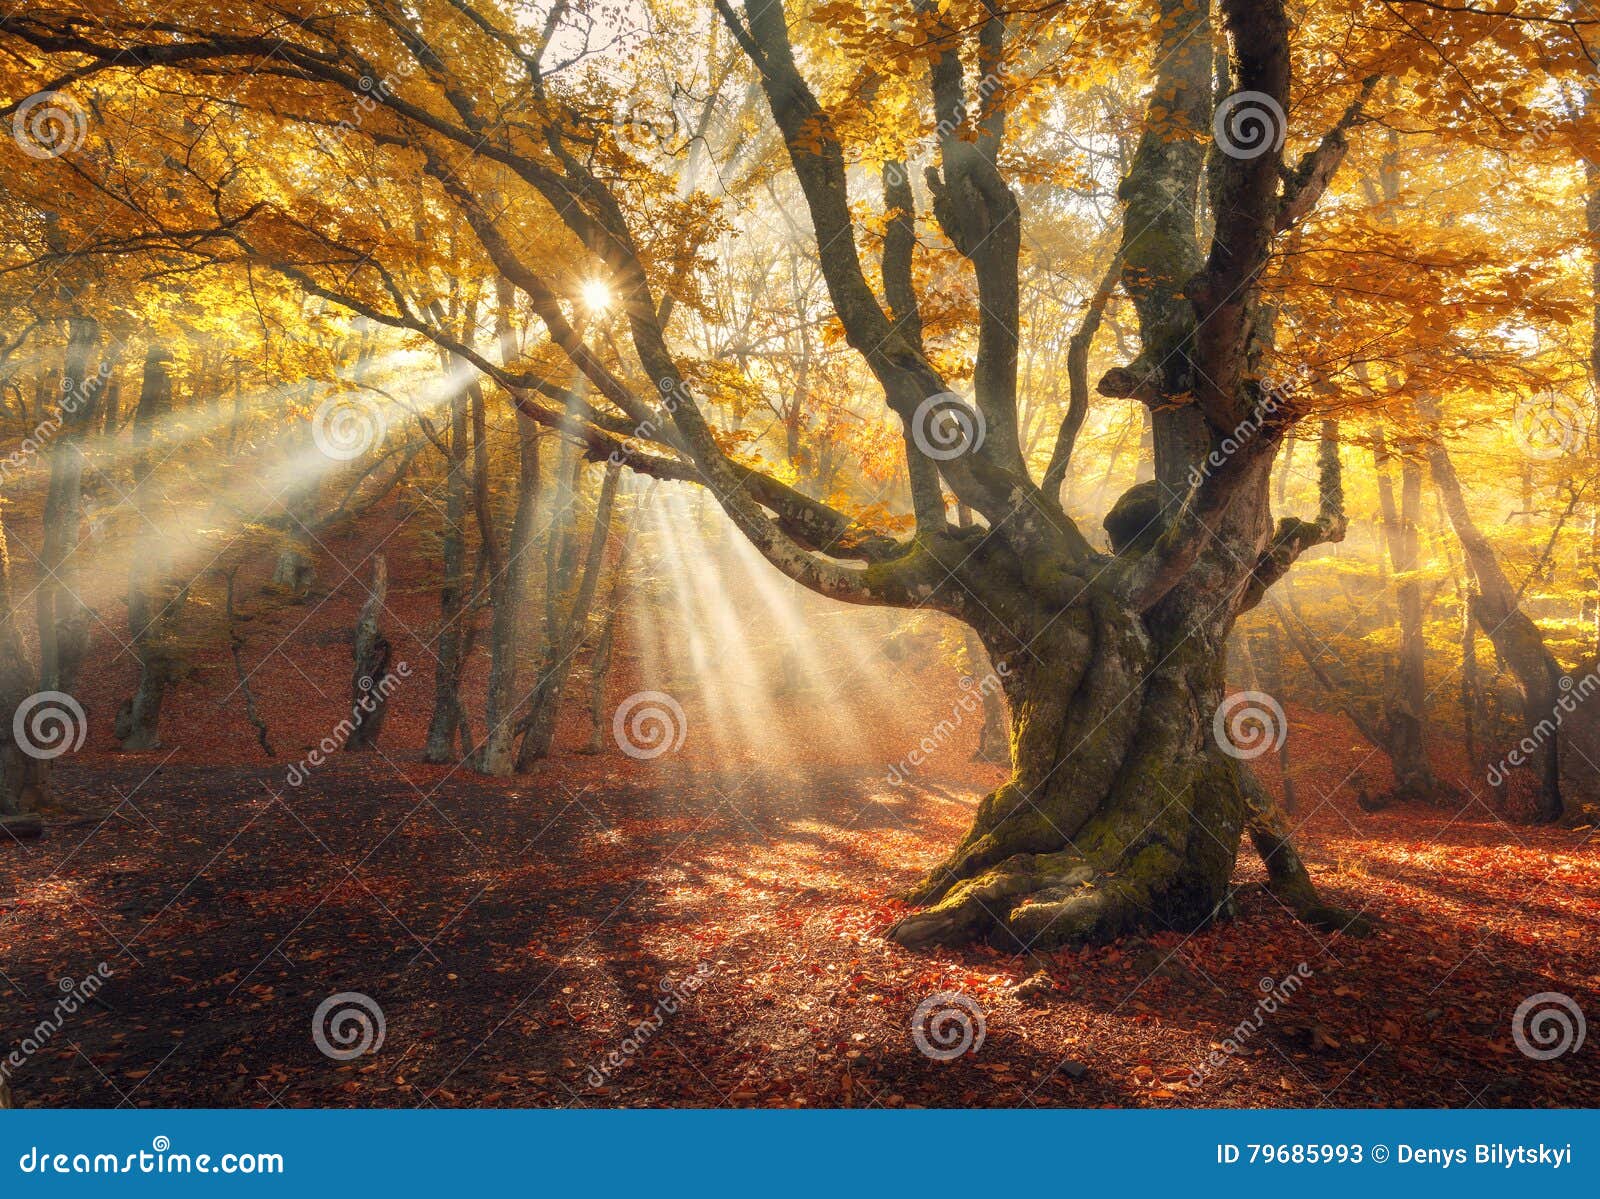 magical old tree. autumn forest in fog with sun rays